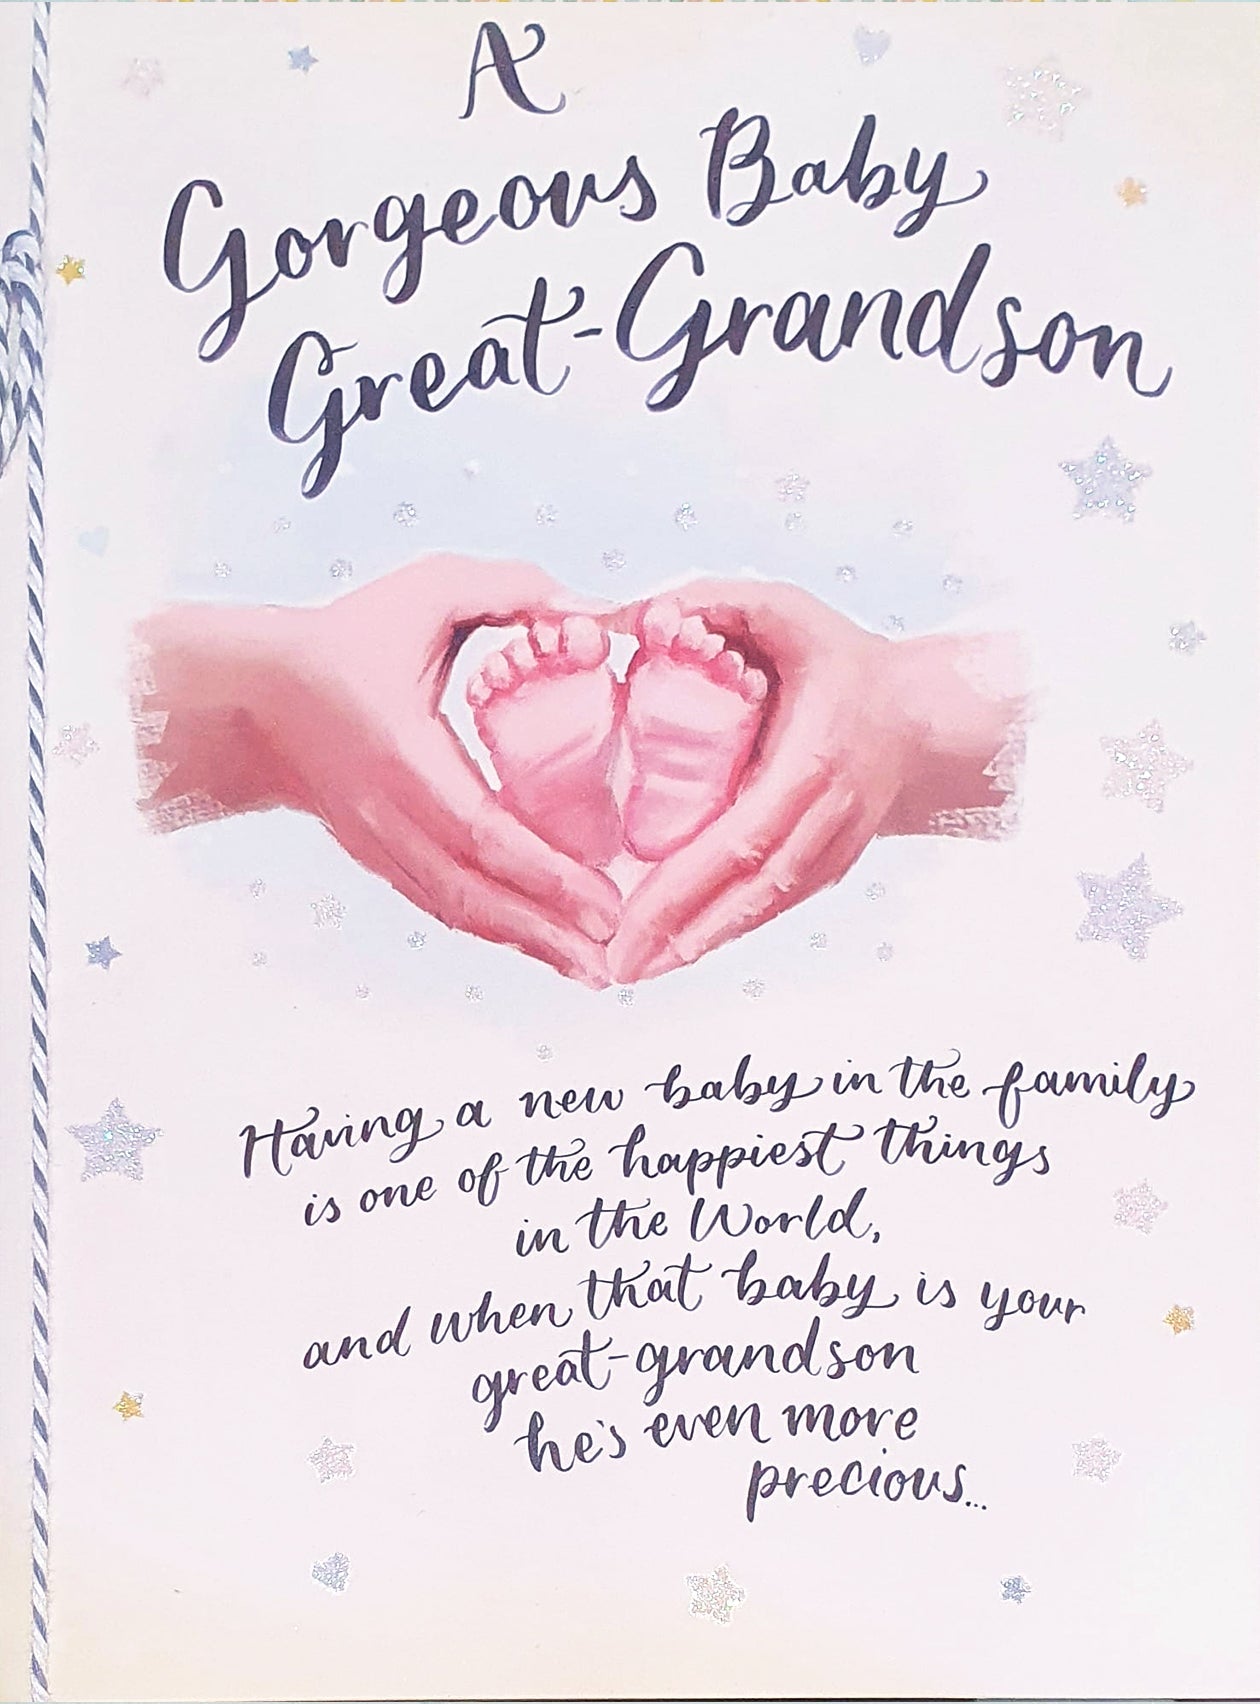 Birth Of Your Great-Grandson Card - The Love Of A Precious Life